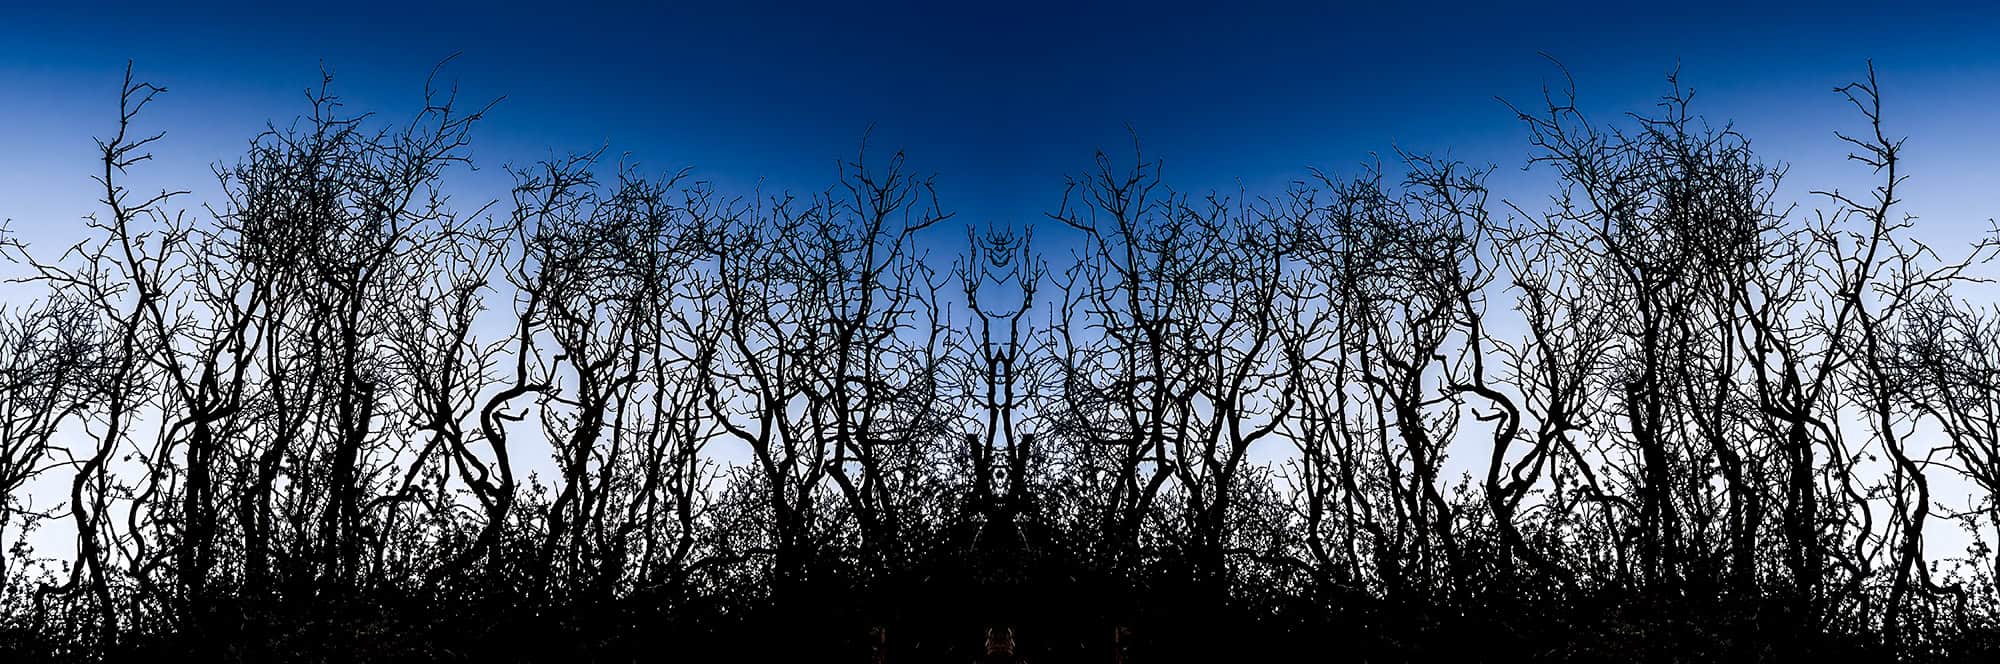 Silhouetted shrubs in collage form against a cool blue evening sky - two up